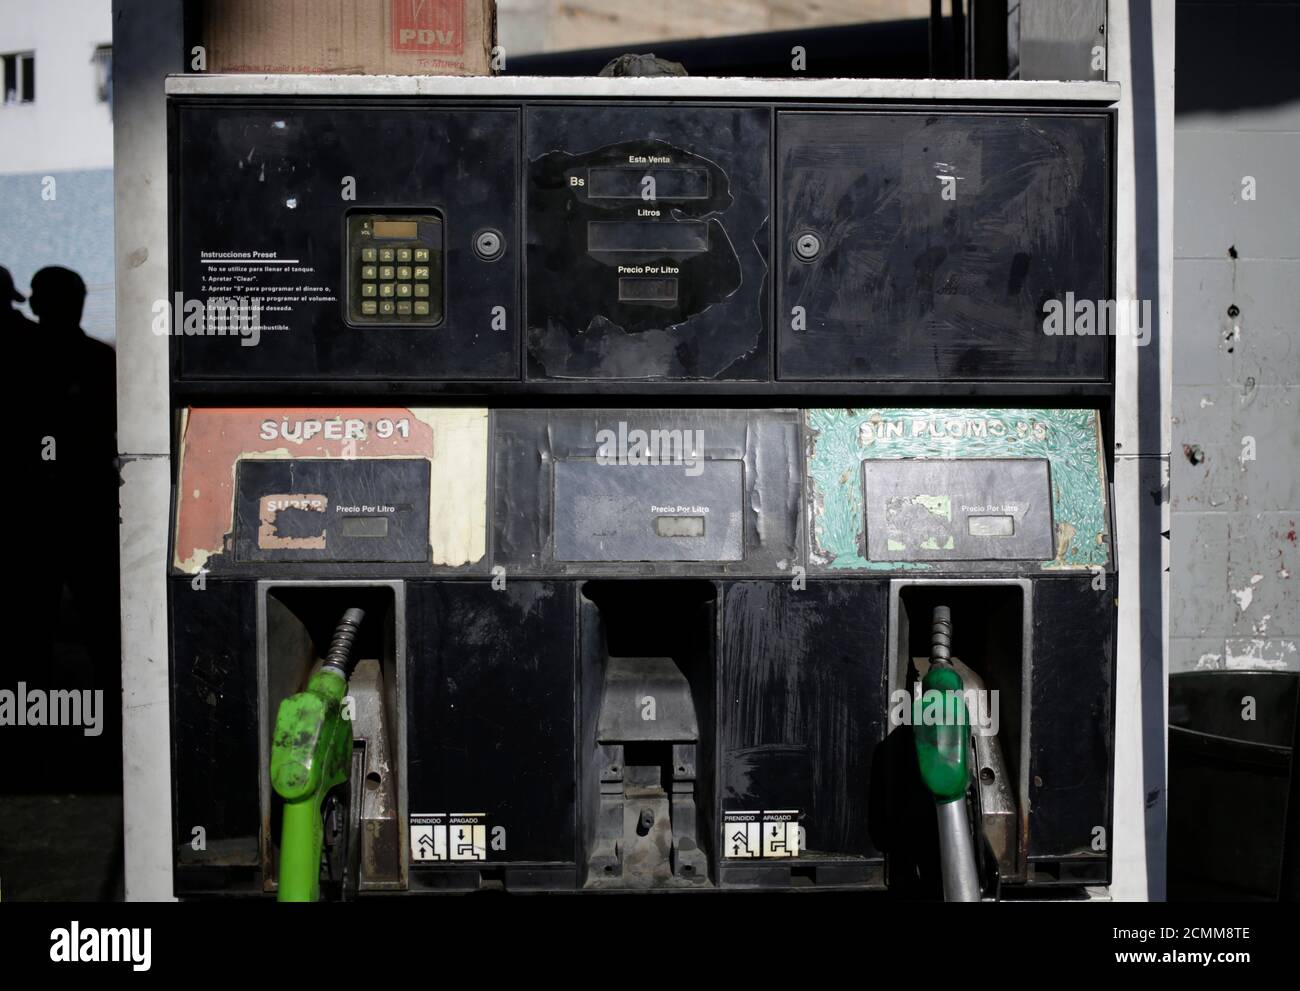 A  fuel dispenser at a gas station of state oil company Petroleos de Venezuela (PDVSA) is seen in Caracas, February 16, 2016. After the price hike, which translated to 1,329 percent for 91-octane-rated gasoline and 6,086 percent for 95 octane, still left fuel as one of the cheapest buys in the country. Venezuela's 91 octane gasoline now costs 1 bolivar per liter and 95 octane gasoline 6 bolivars - the latter being 60 U.S. cents at the strongest official rate, but just $0.006 on the black market. Picture taken February 16, 2016. REUTERS/Marco Bello Stock Photo